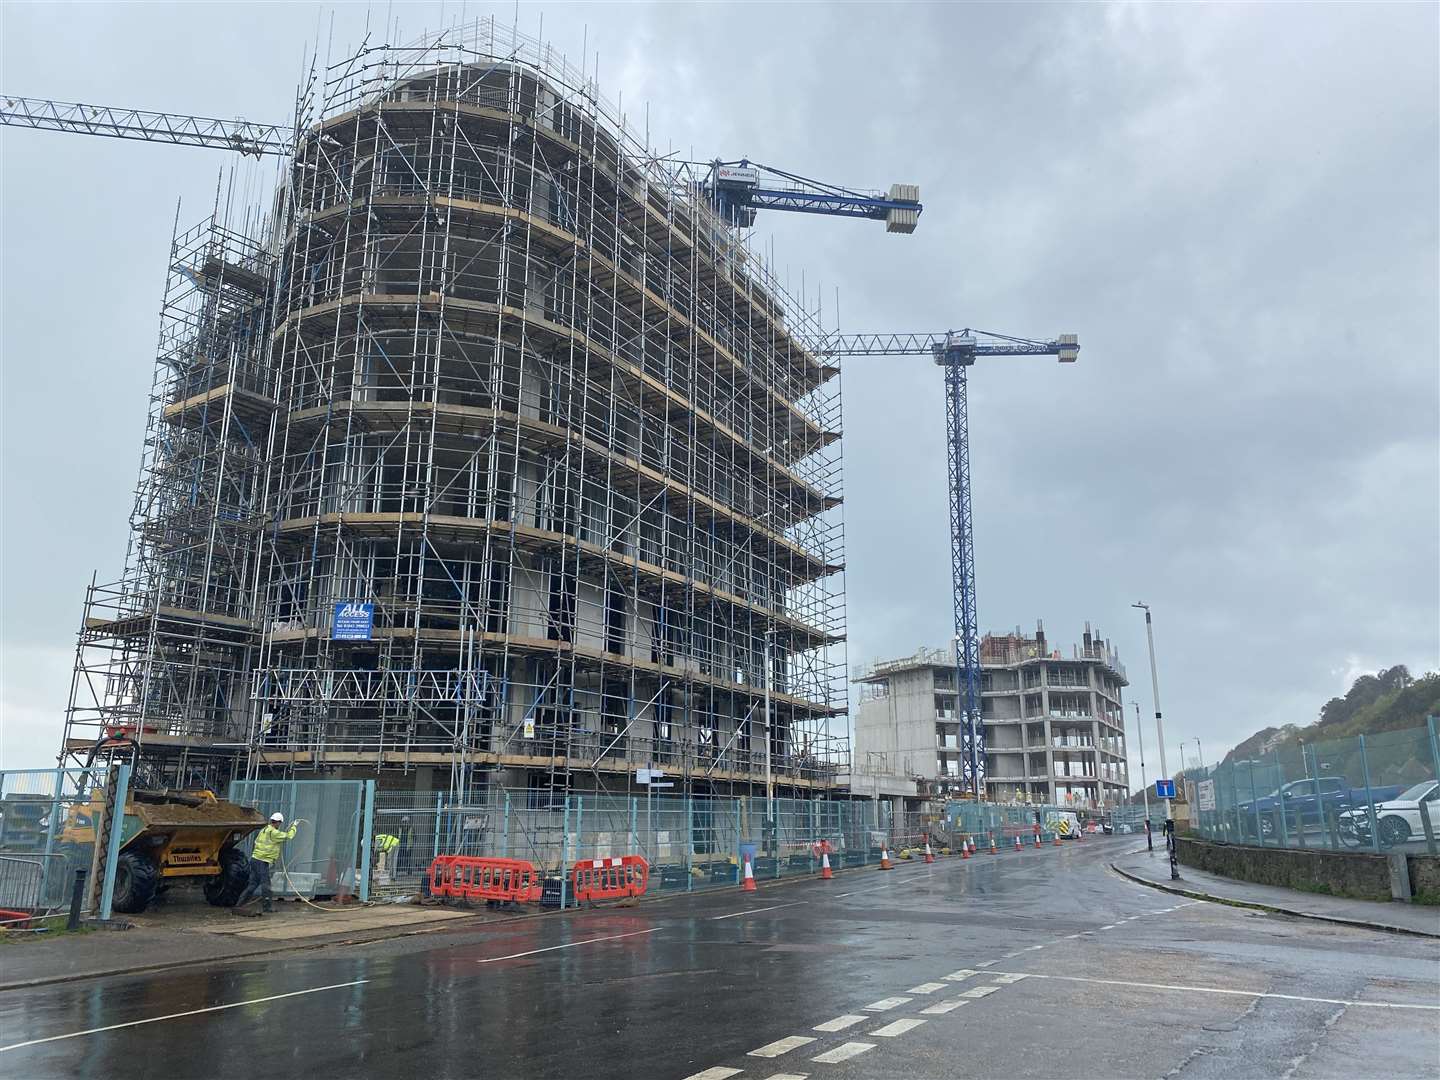 Work continues on the seafront development in Folkestone. KM photo